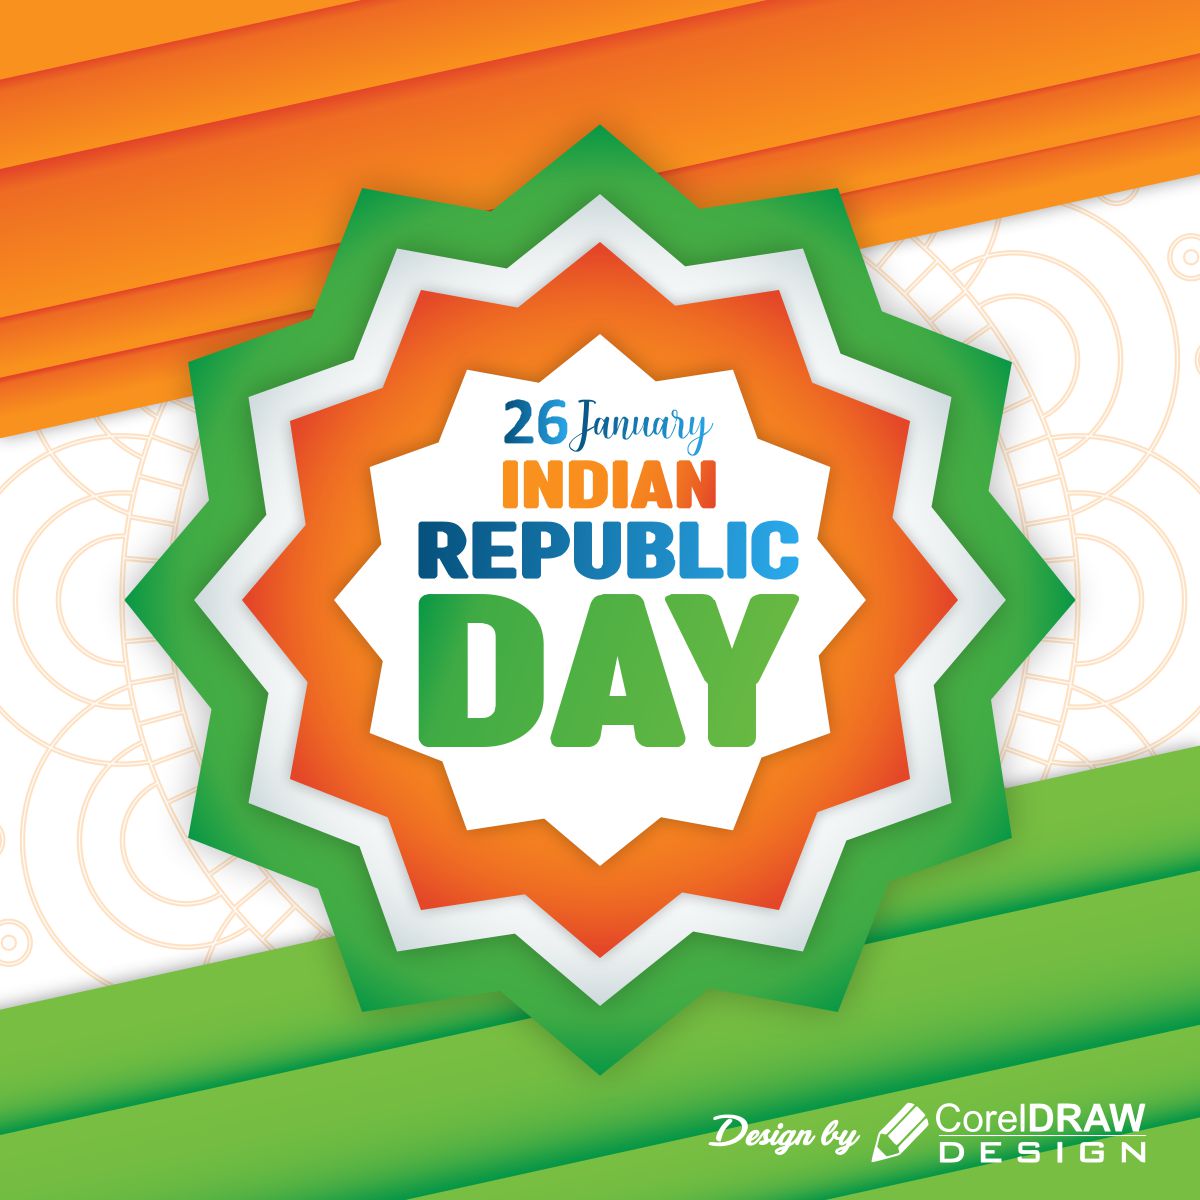 26 January Indian Republic Day Poster Vector Design For Free